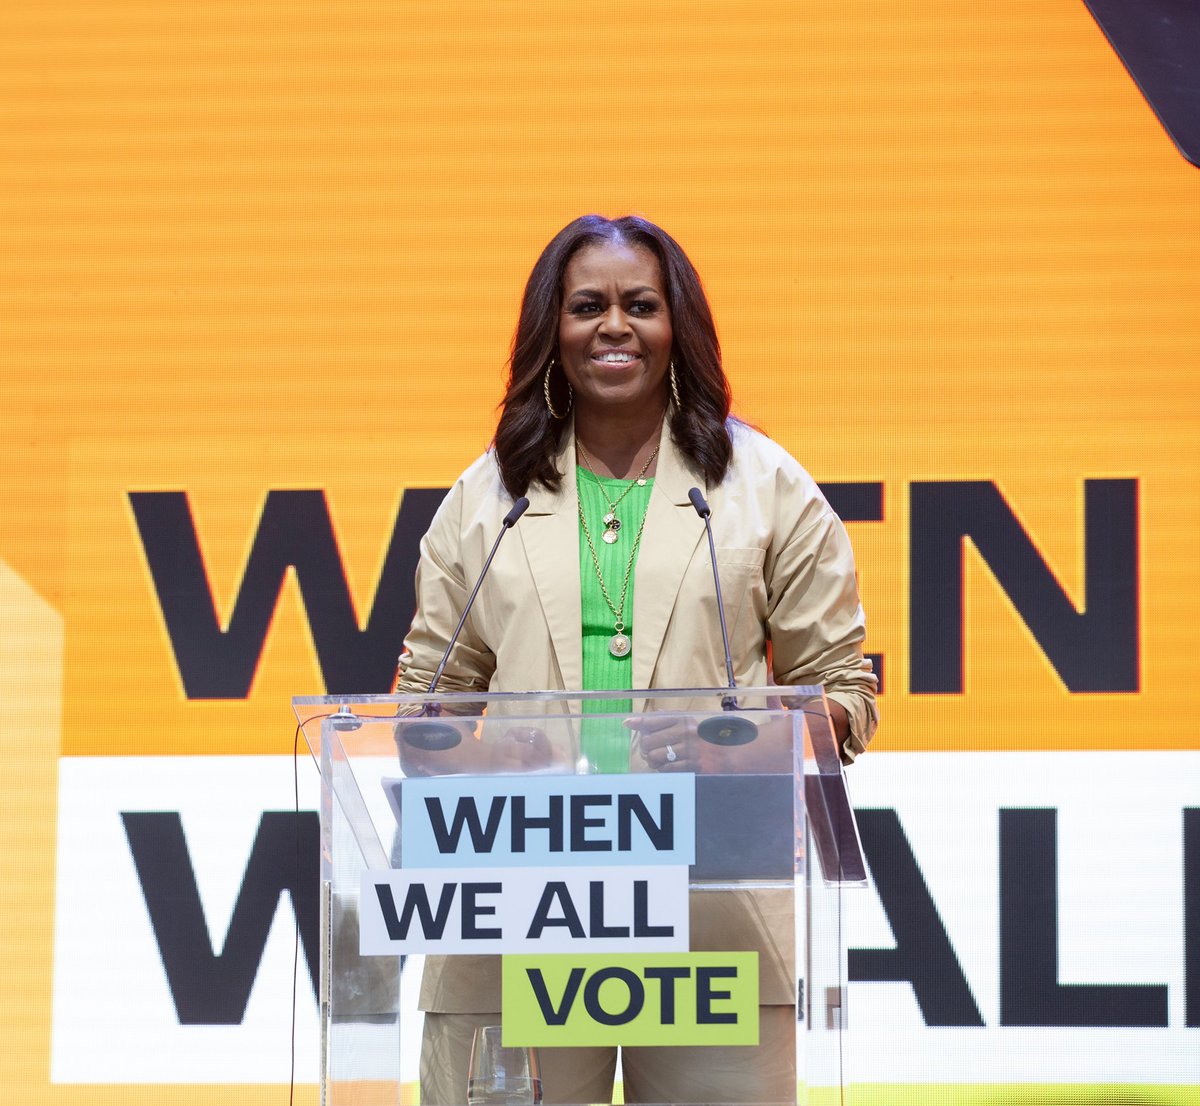 Now is the time to do all we can to change the culture around voting. I hope you’ll join @WhenWeAllVote in doing this work—we need everyone to get involved and do their part to build a better and more inclusive democracy not only for us, but for the generations to follow.